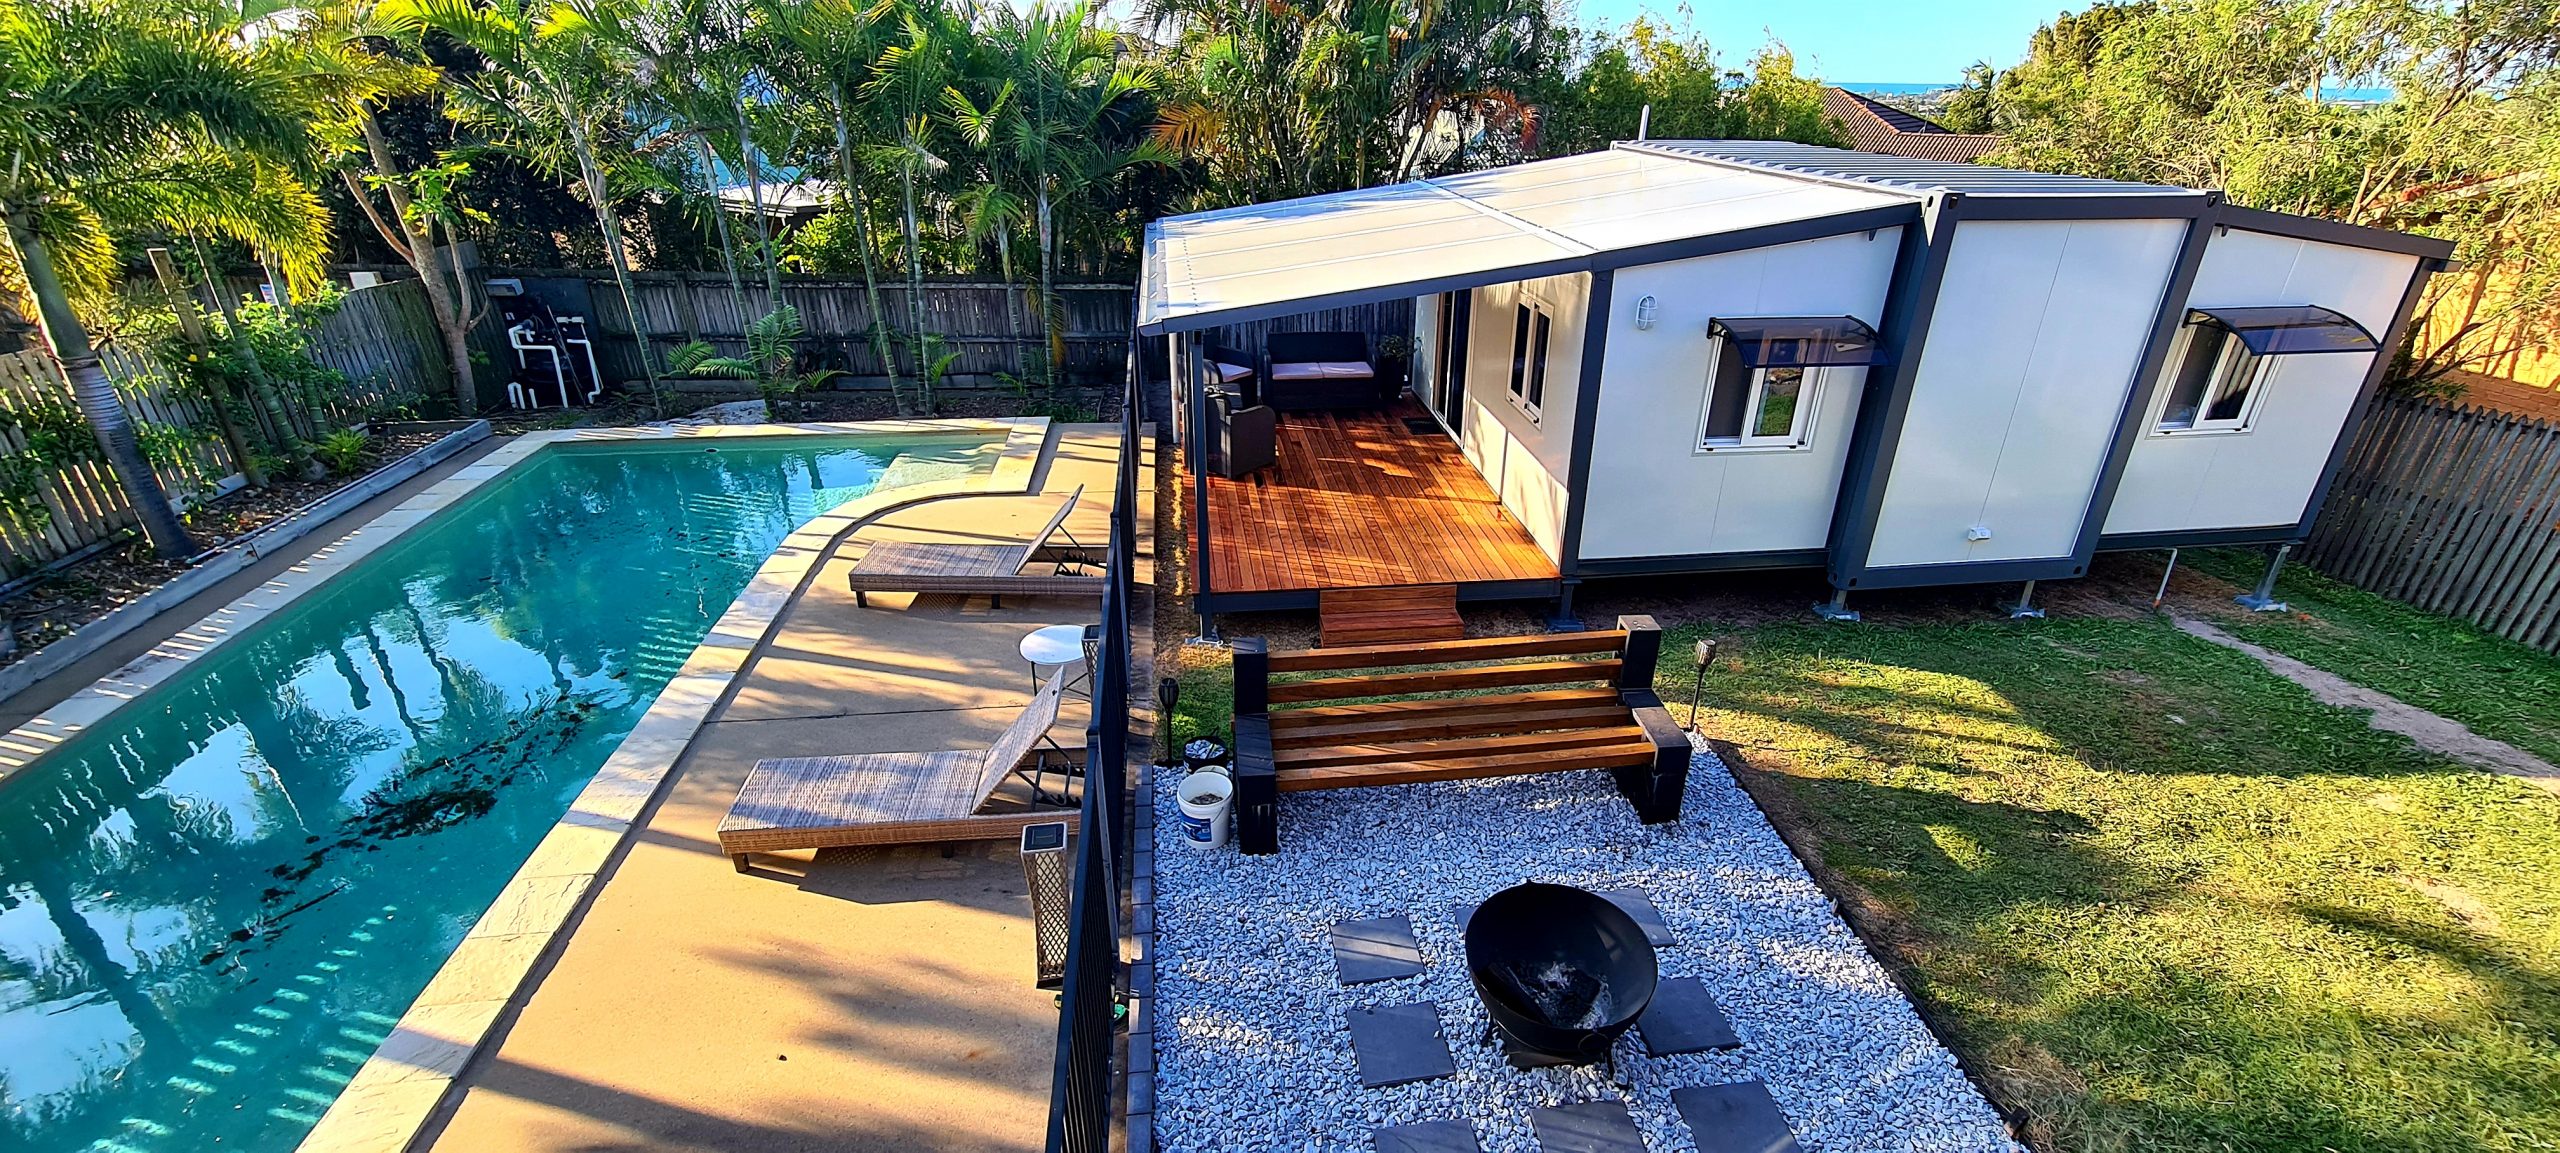 The Keppel 1 Bedroom Granny Flat with Deck and Patio